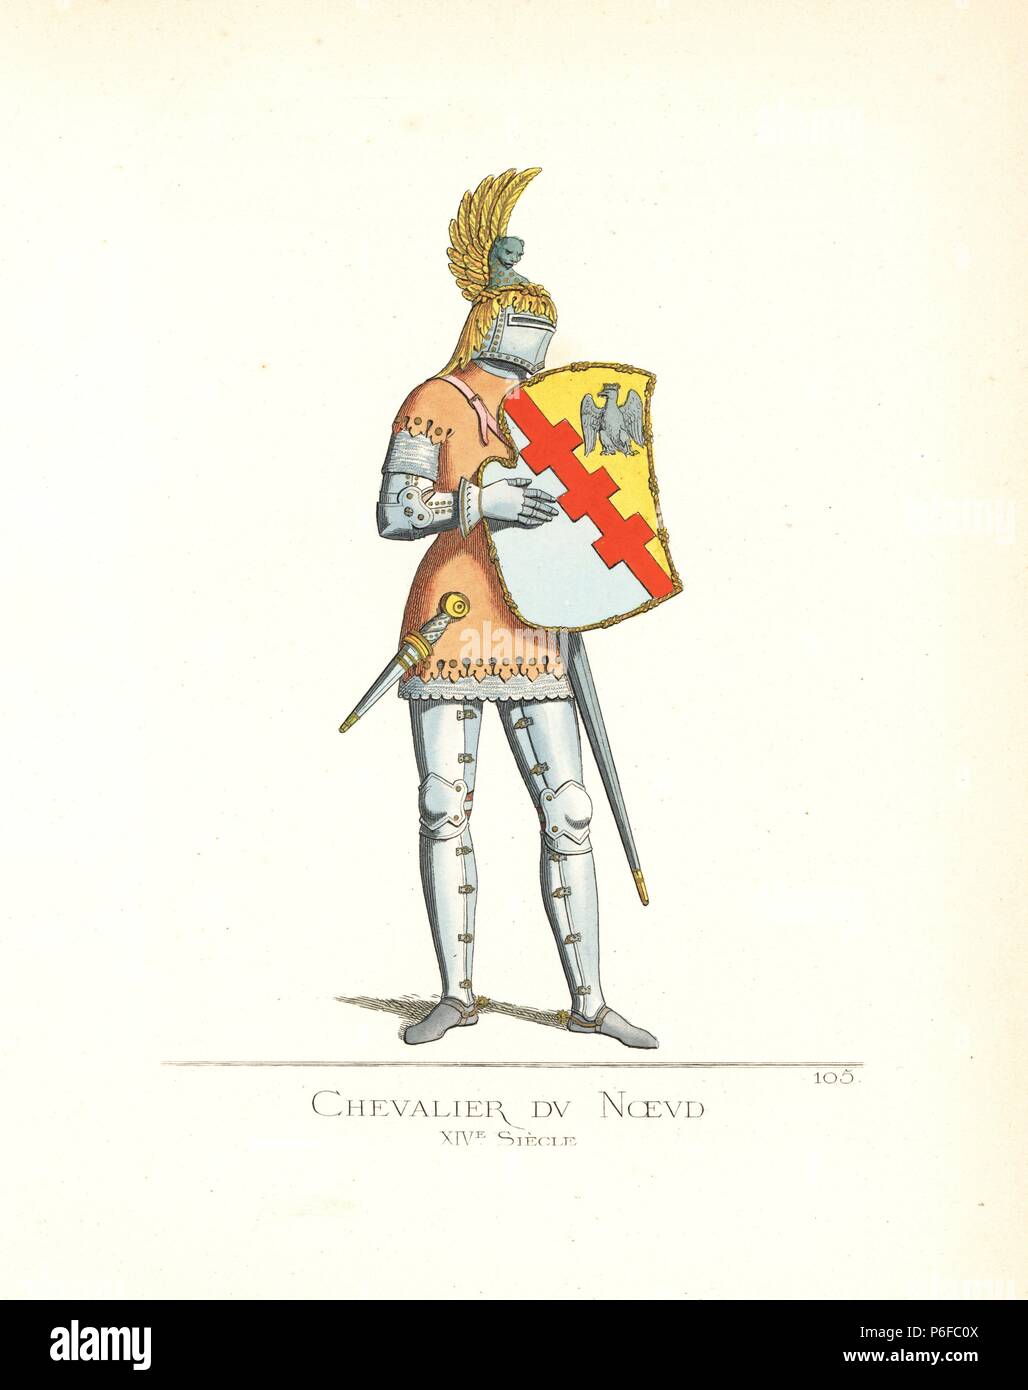 Knight of the short-lived Order of the Knot (Noeud), an order of chivalry founded in 1352 by Louis of Taranto, King of Naples. He wears a brown tabard, steel helm, suit of armour, gauntlets and spurs. The helm and edges of the shield are decorated with knots. From a sepulchral stone in the church of Saint Catherine, Pisa. Handcoloured illustration drawn and lithographed by Paul Mercuri with text by Camille Bonnard from 'Historical Costumes from the 12th to 15th Centuries,' Levy Fils, Paris, 1861. Stock Photo